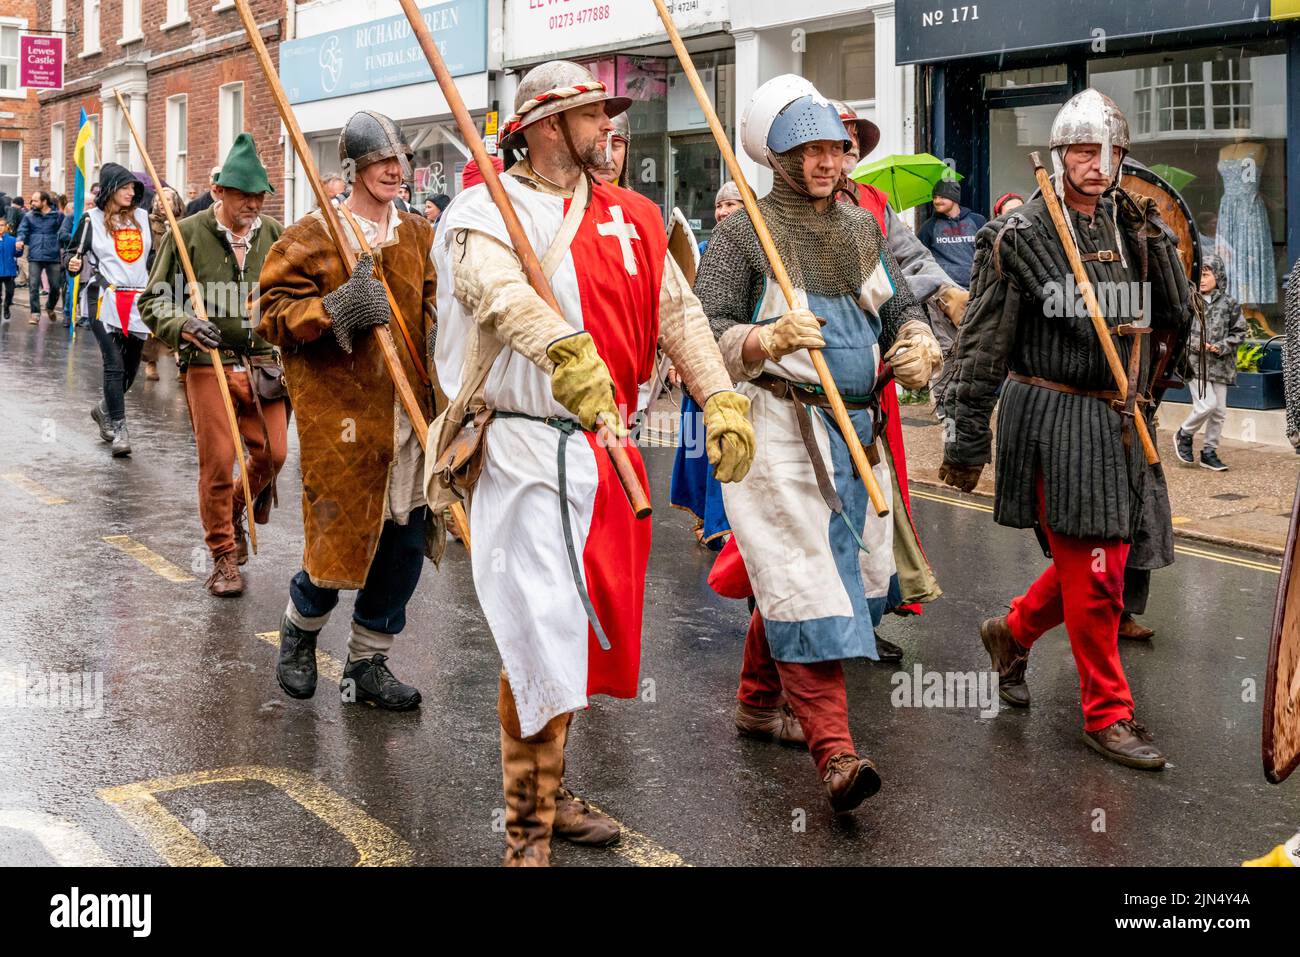 People Dressed In Medieval Costume Take Part In A Procession Through The Streets Of Lewes During The Battle Of Lewes Re-Enactment Event, Lewes, UK. Stock Photo